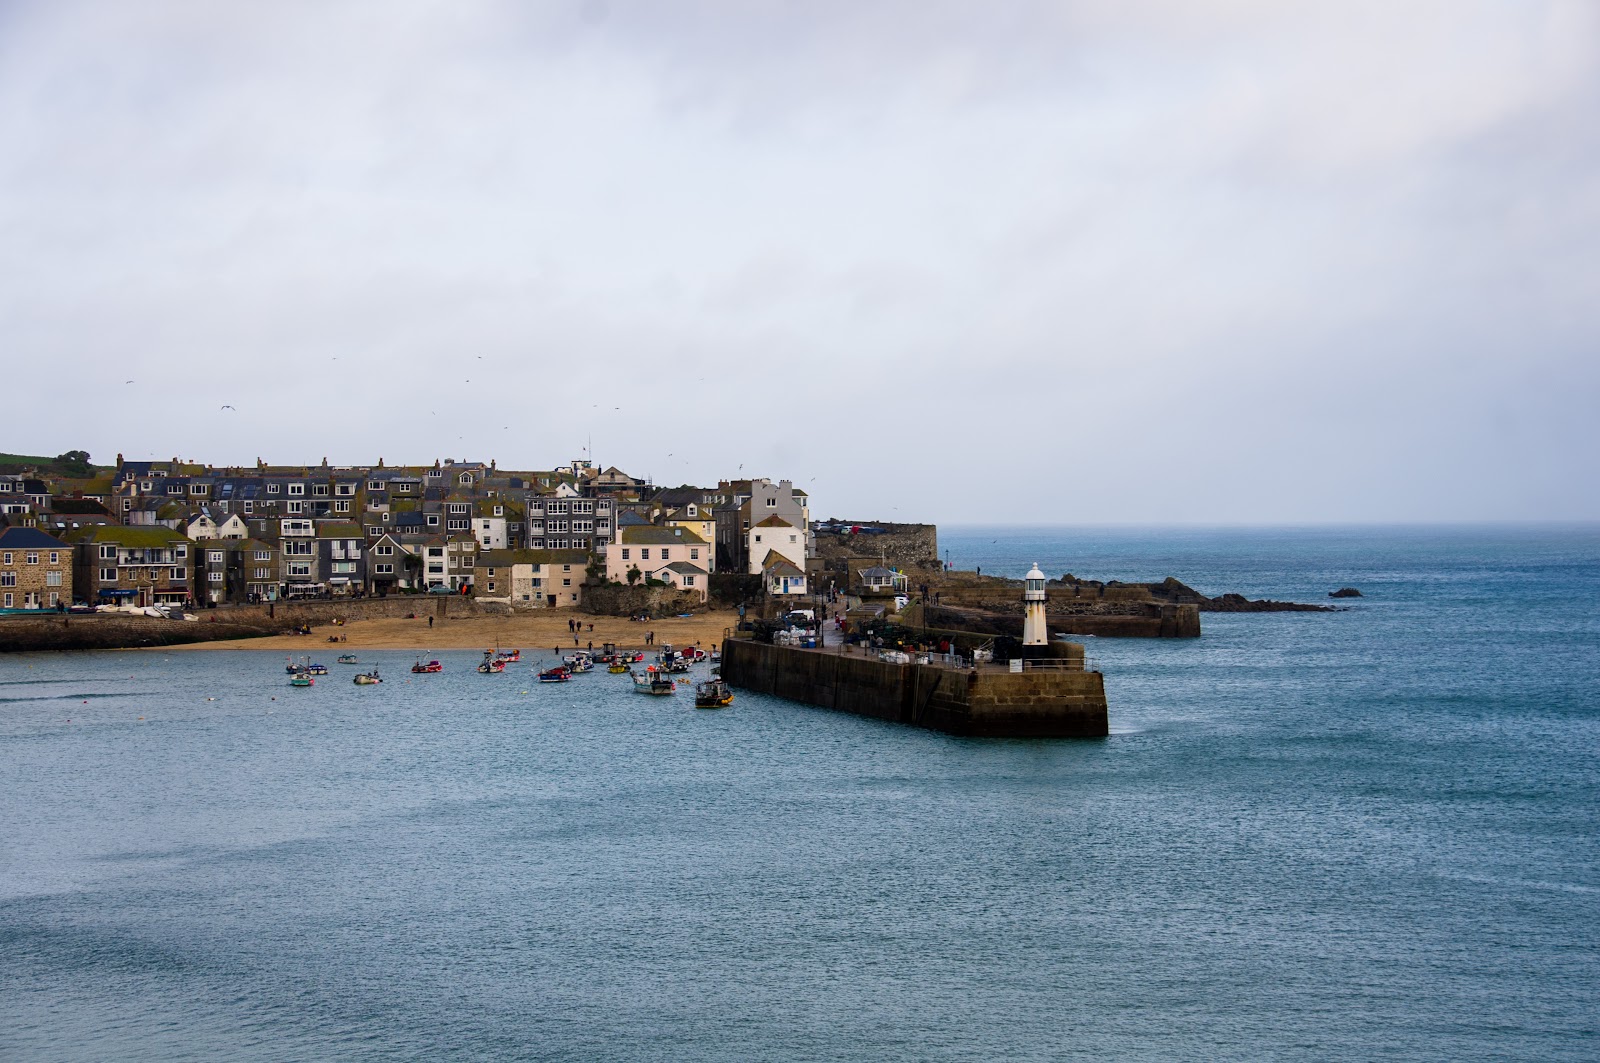 https://whatremovals.co.uk/wp-content/uploads/2022/02/St Ives harbour-300x199.jpeg